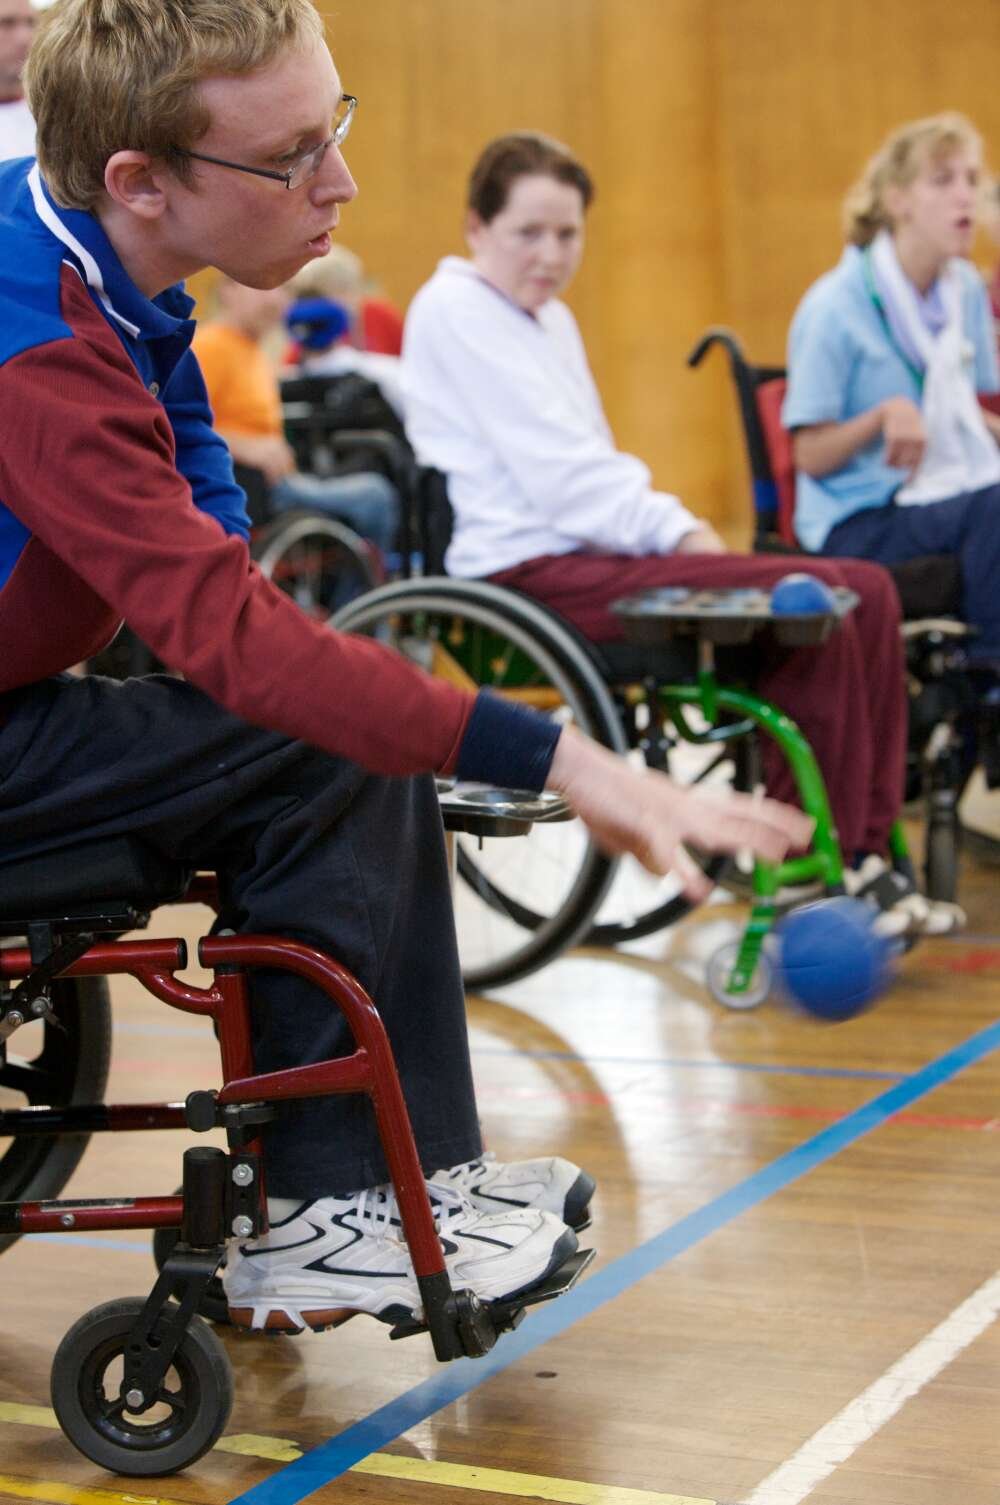 Man in wheelchair participating in game of boccia, with his hand outstretched and the ball in midair. Two women in wheelchairs sit behind him